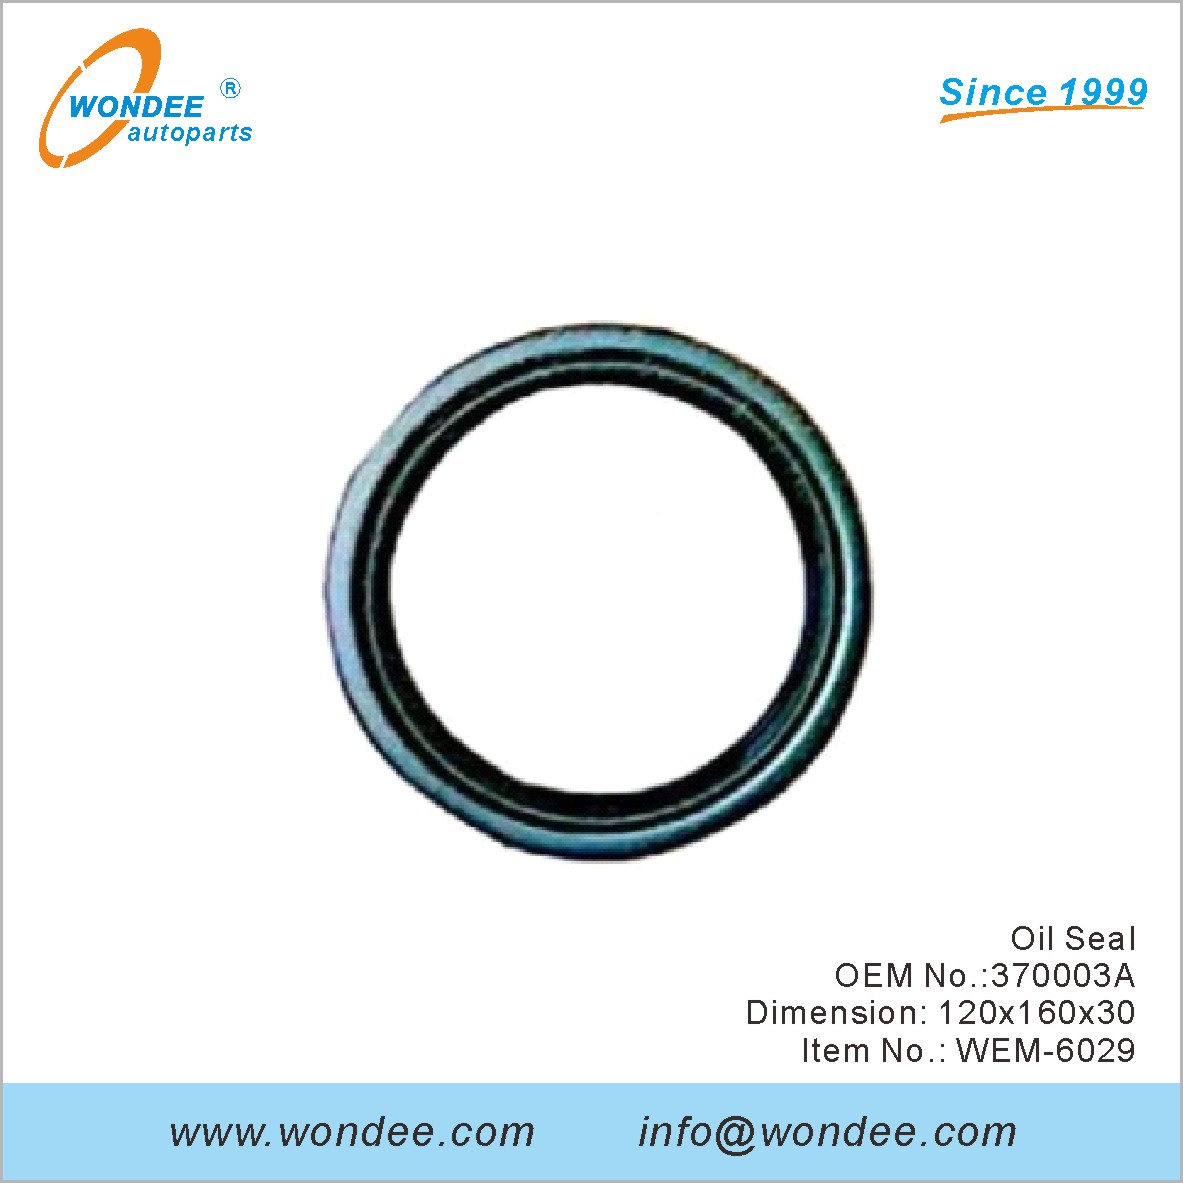 Oil Seal OEM 370003A for engine mouting from WONDEE